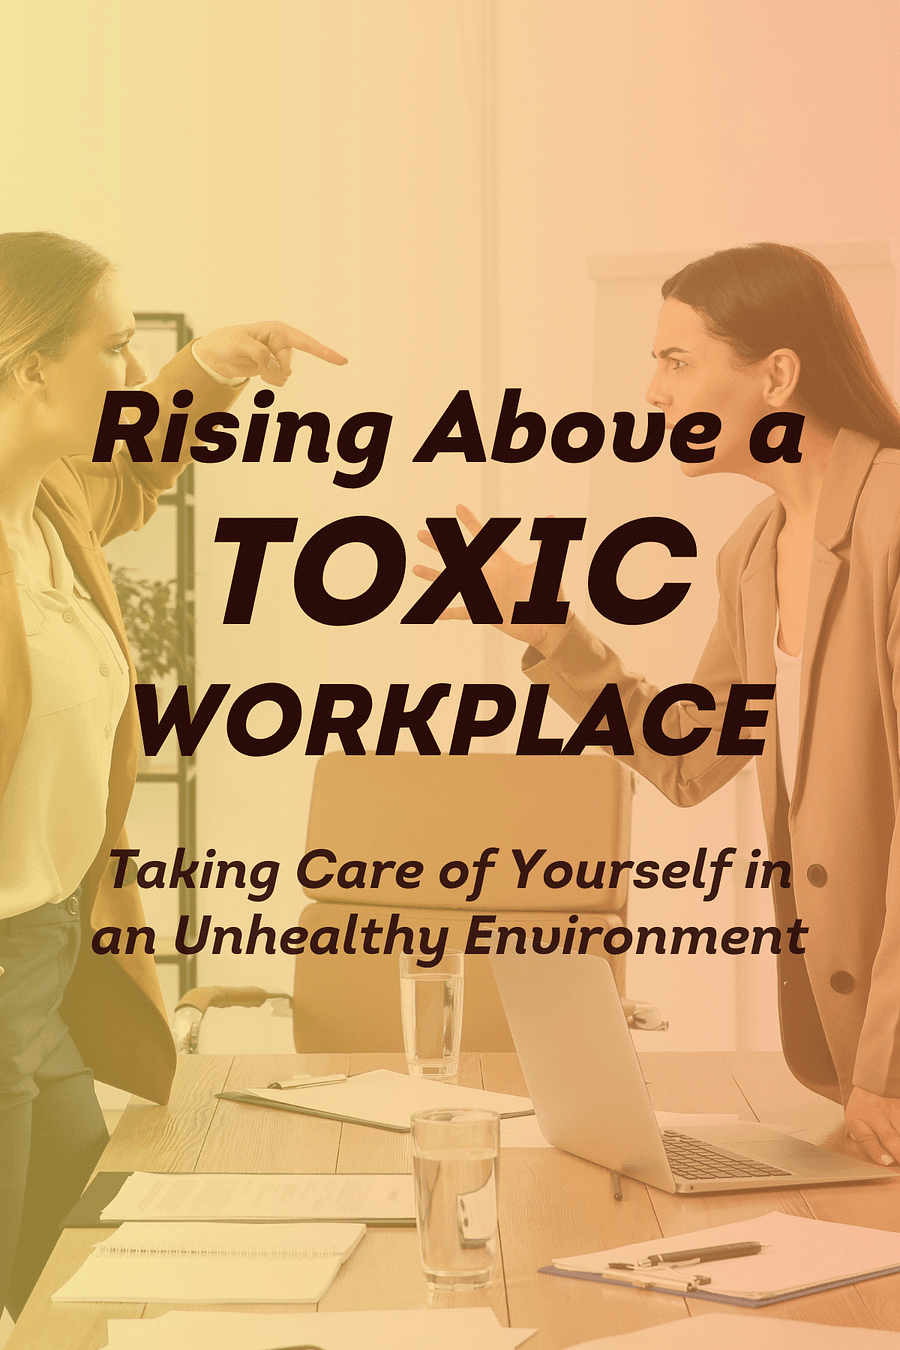 Rising Above a Toxic Workplace by Gary Chapman, Paul White - Book Summary